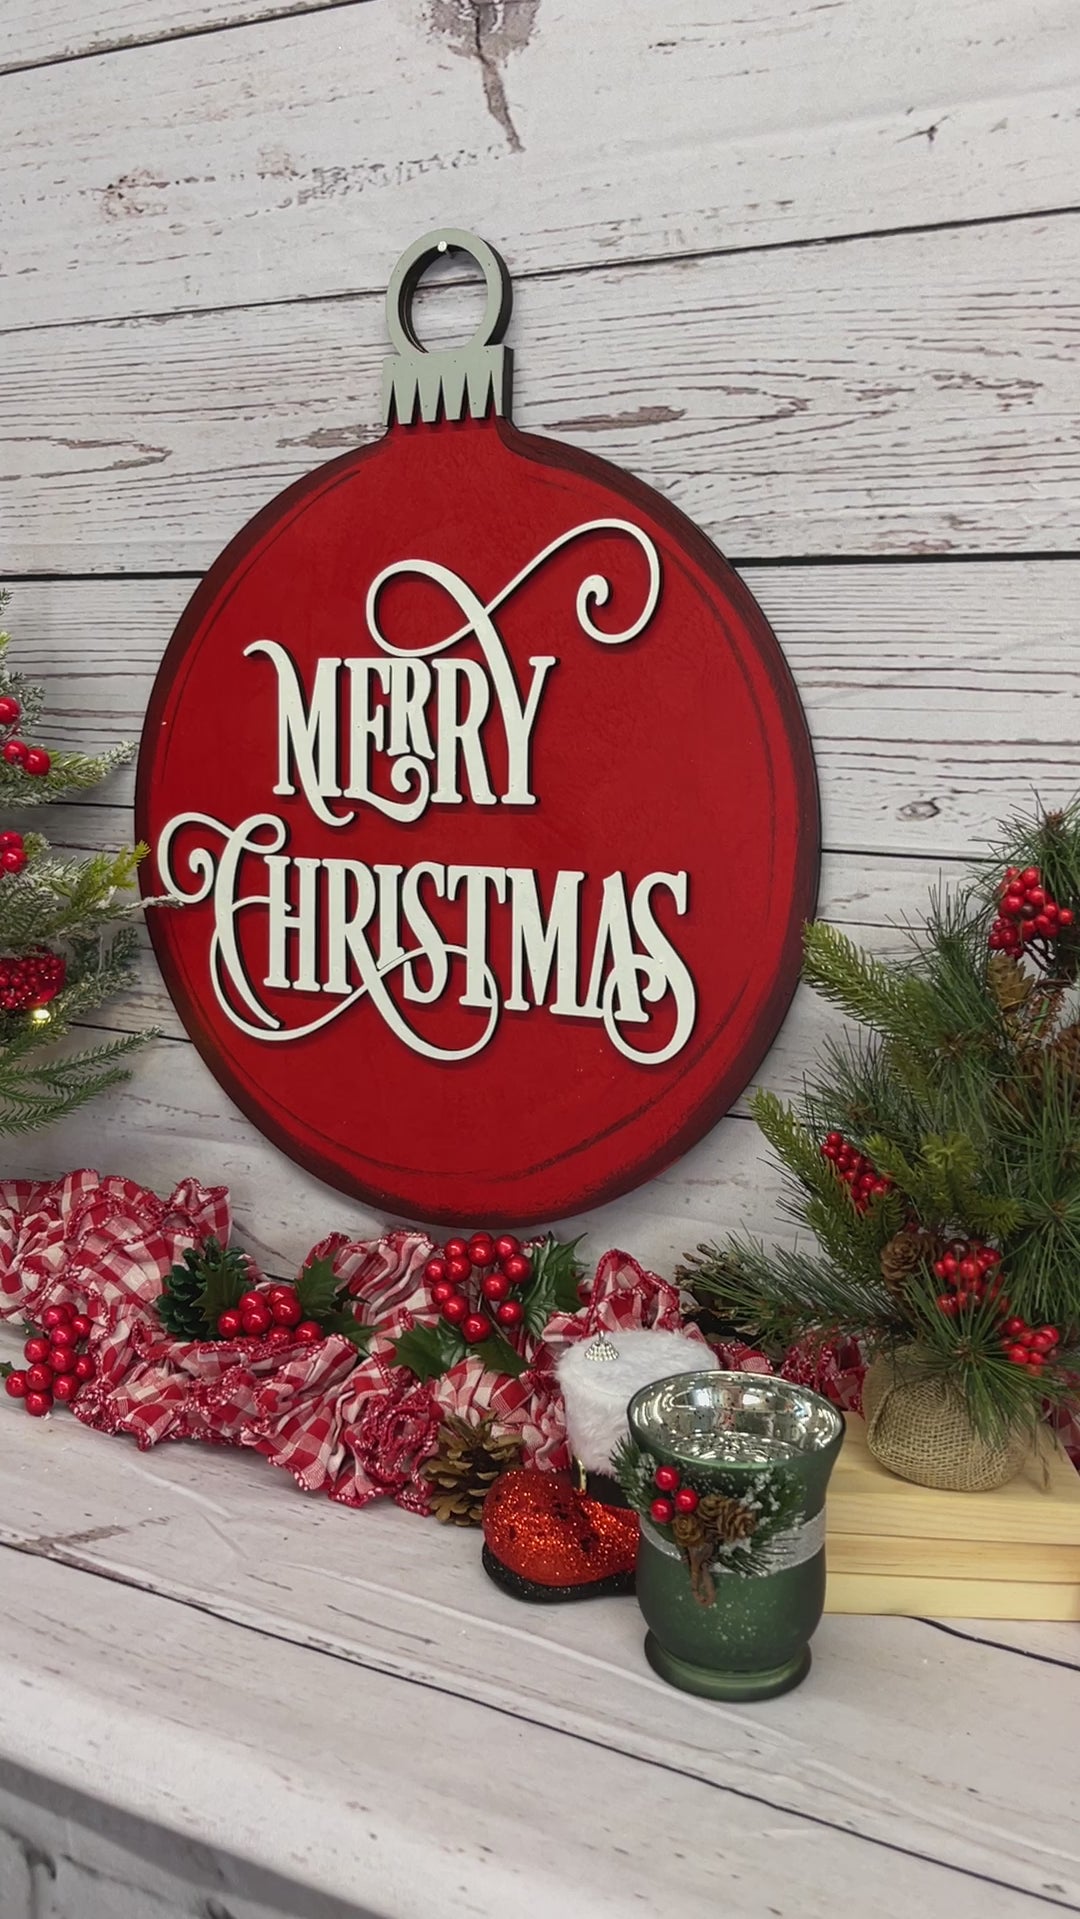 Merry Christmas Round Bulb Sign Blank Ready to be Painted by You